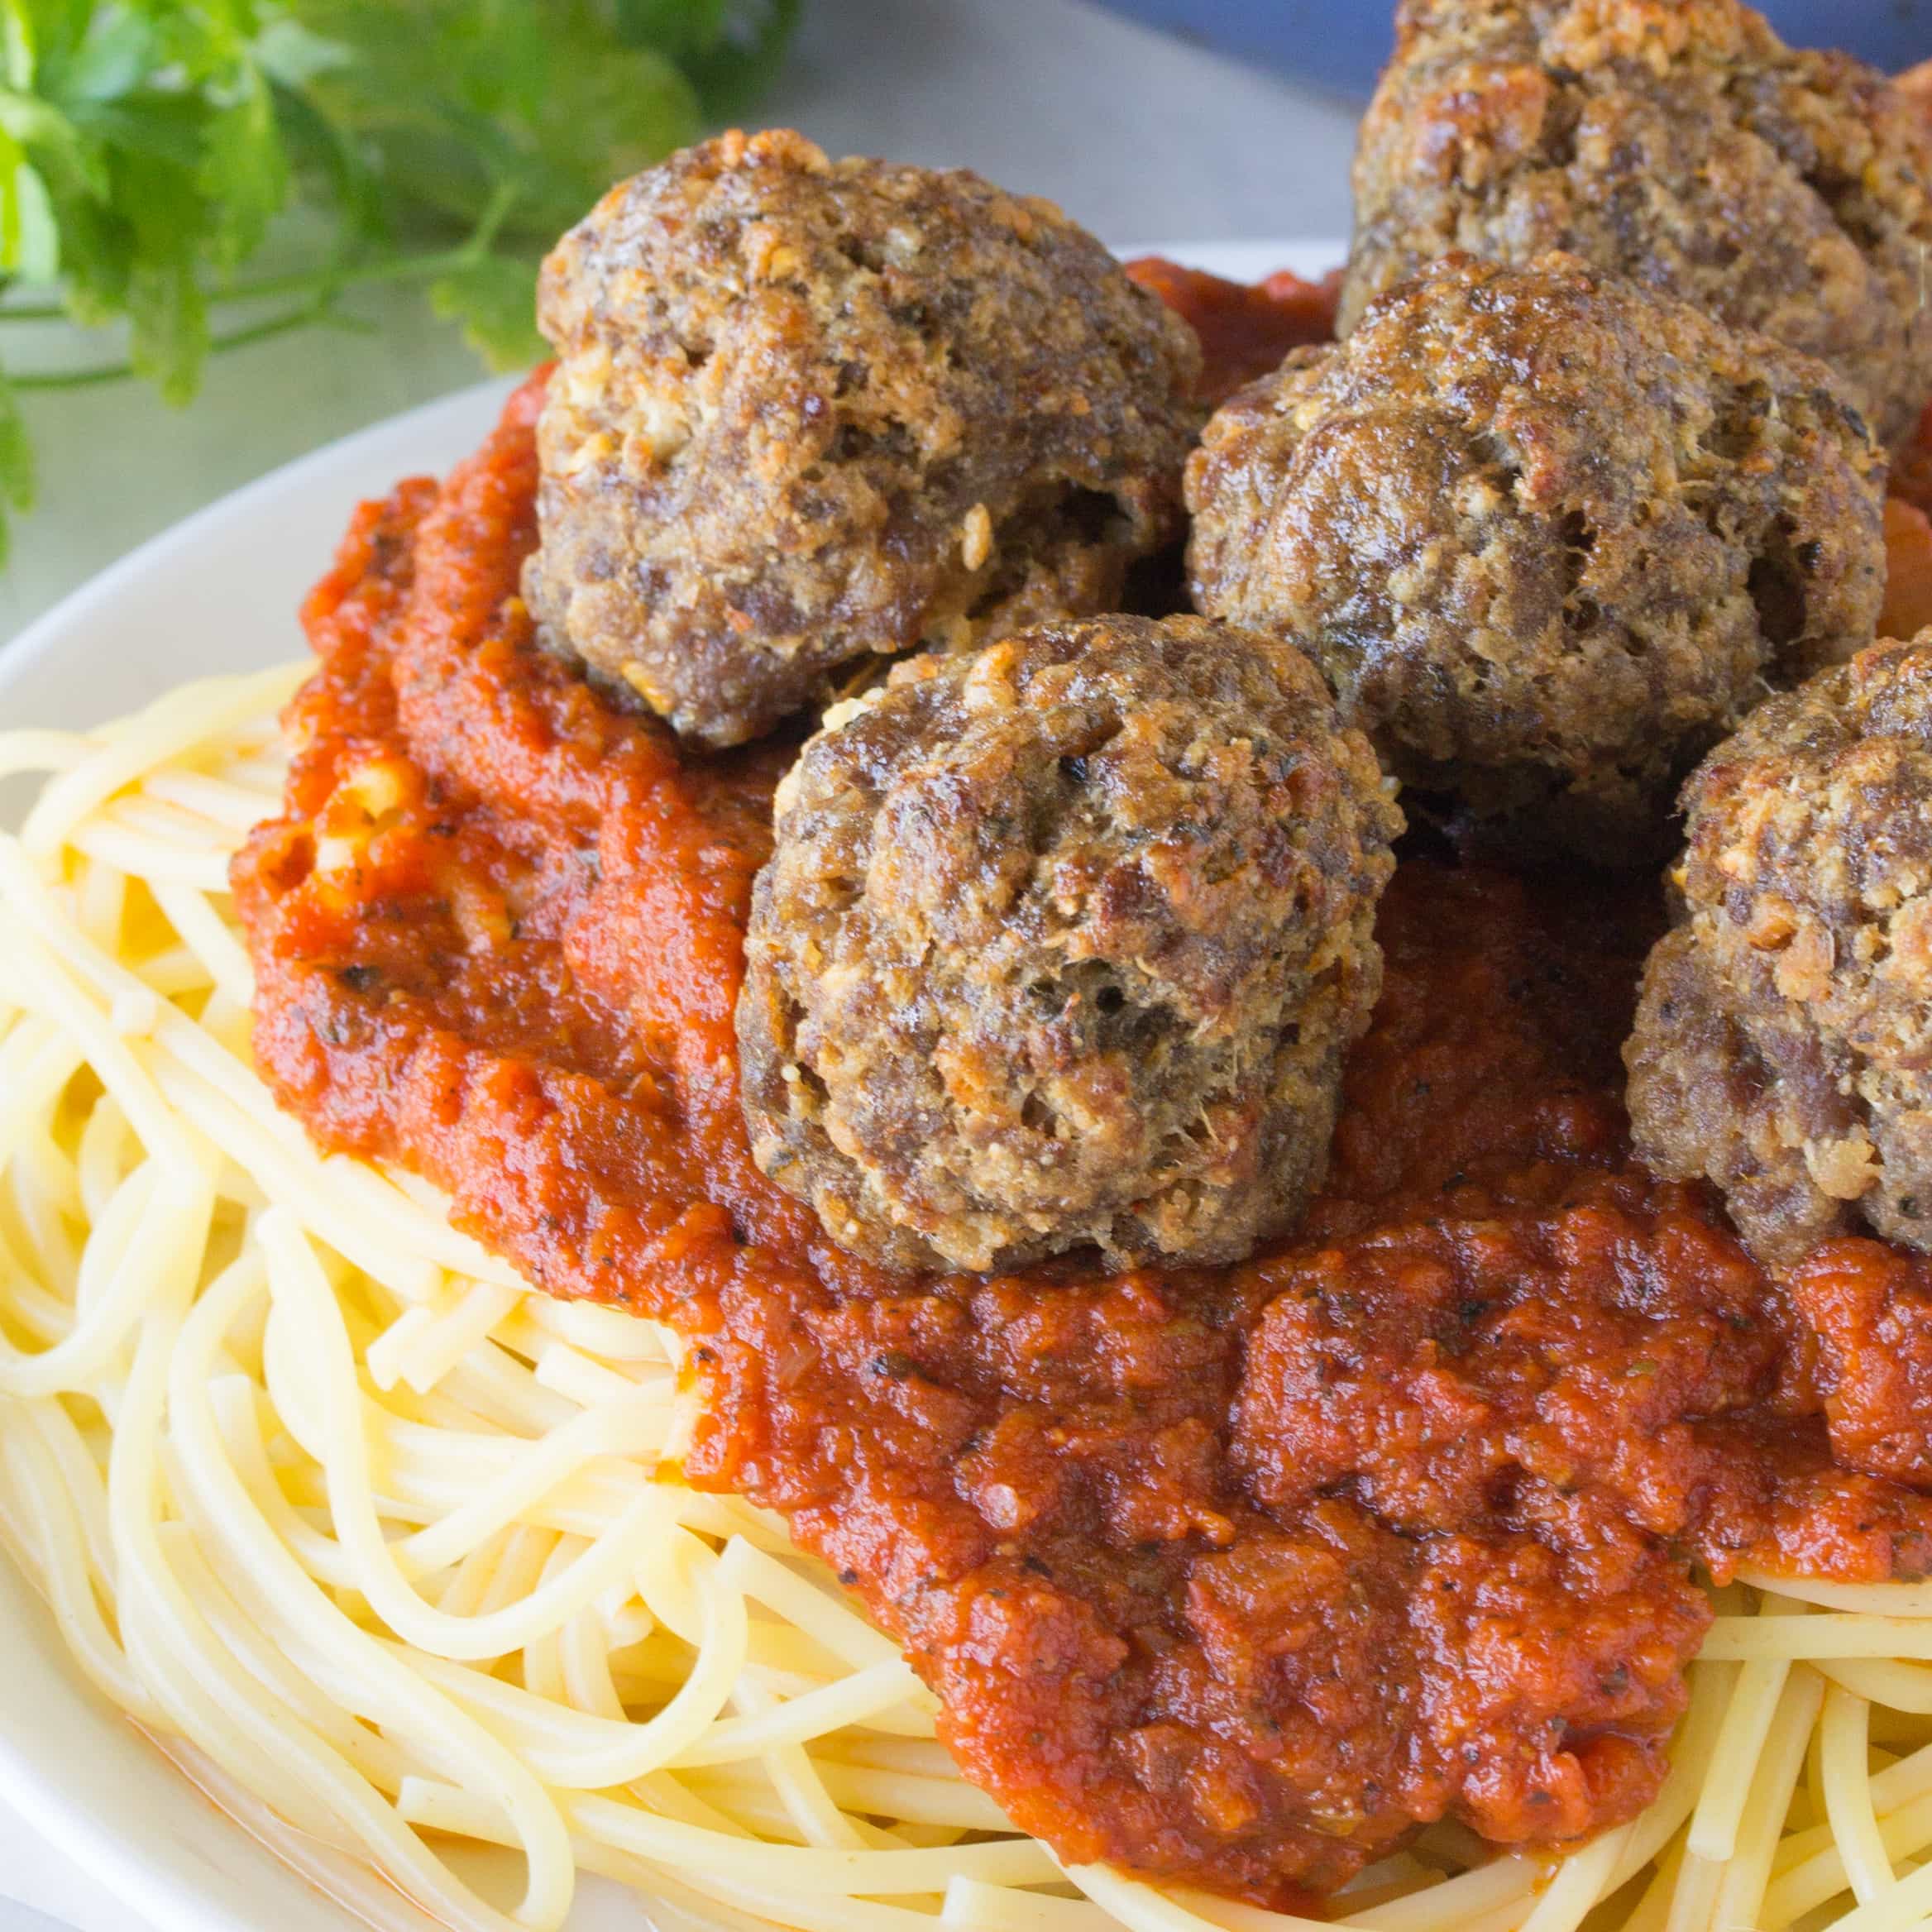 These are the best baked meatballs out there! A crispy crust and a juicy and flavorful center. These meatballs are sure to quickly become a family favorite!